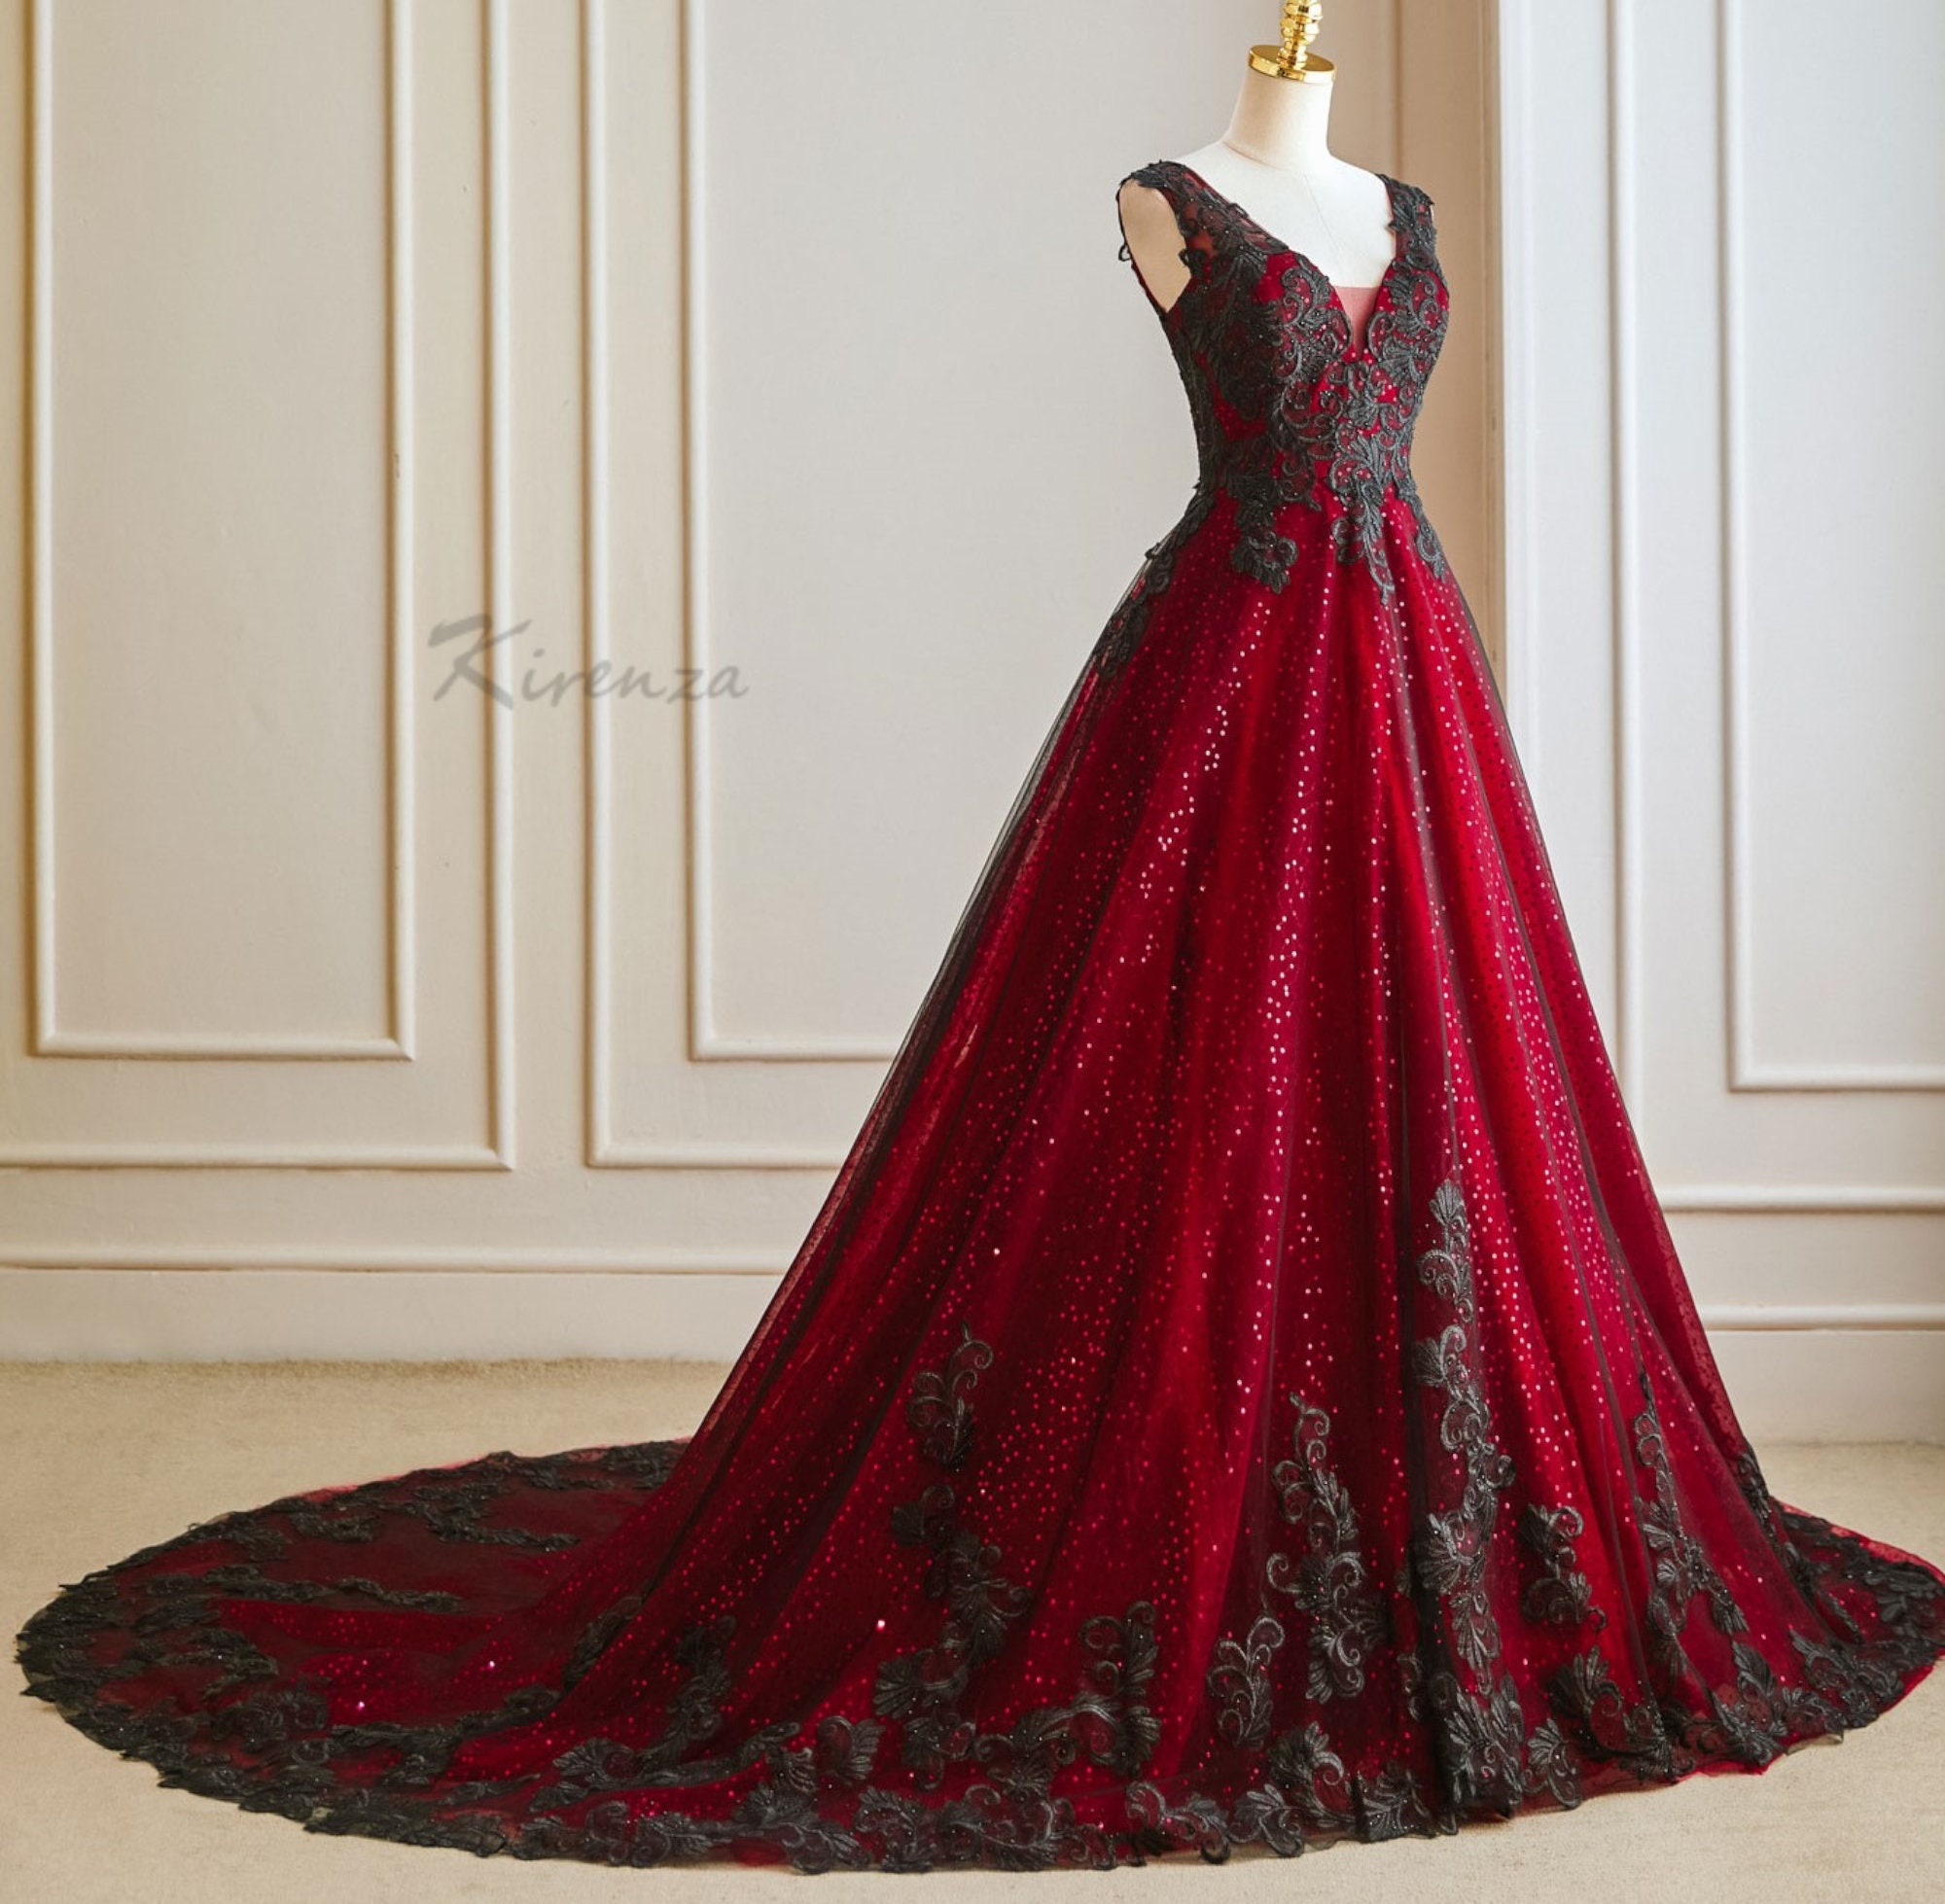 Blood Red Wedding Dresses: 12 Amazing Suggestions | Red ball gowns, Ball  dresses, Red wedding gowns